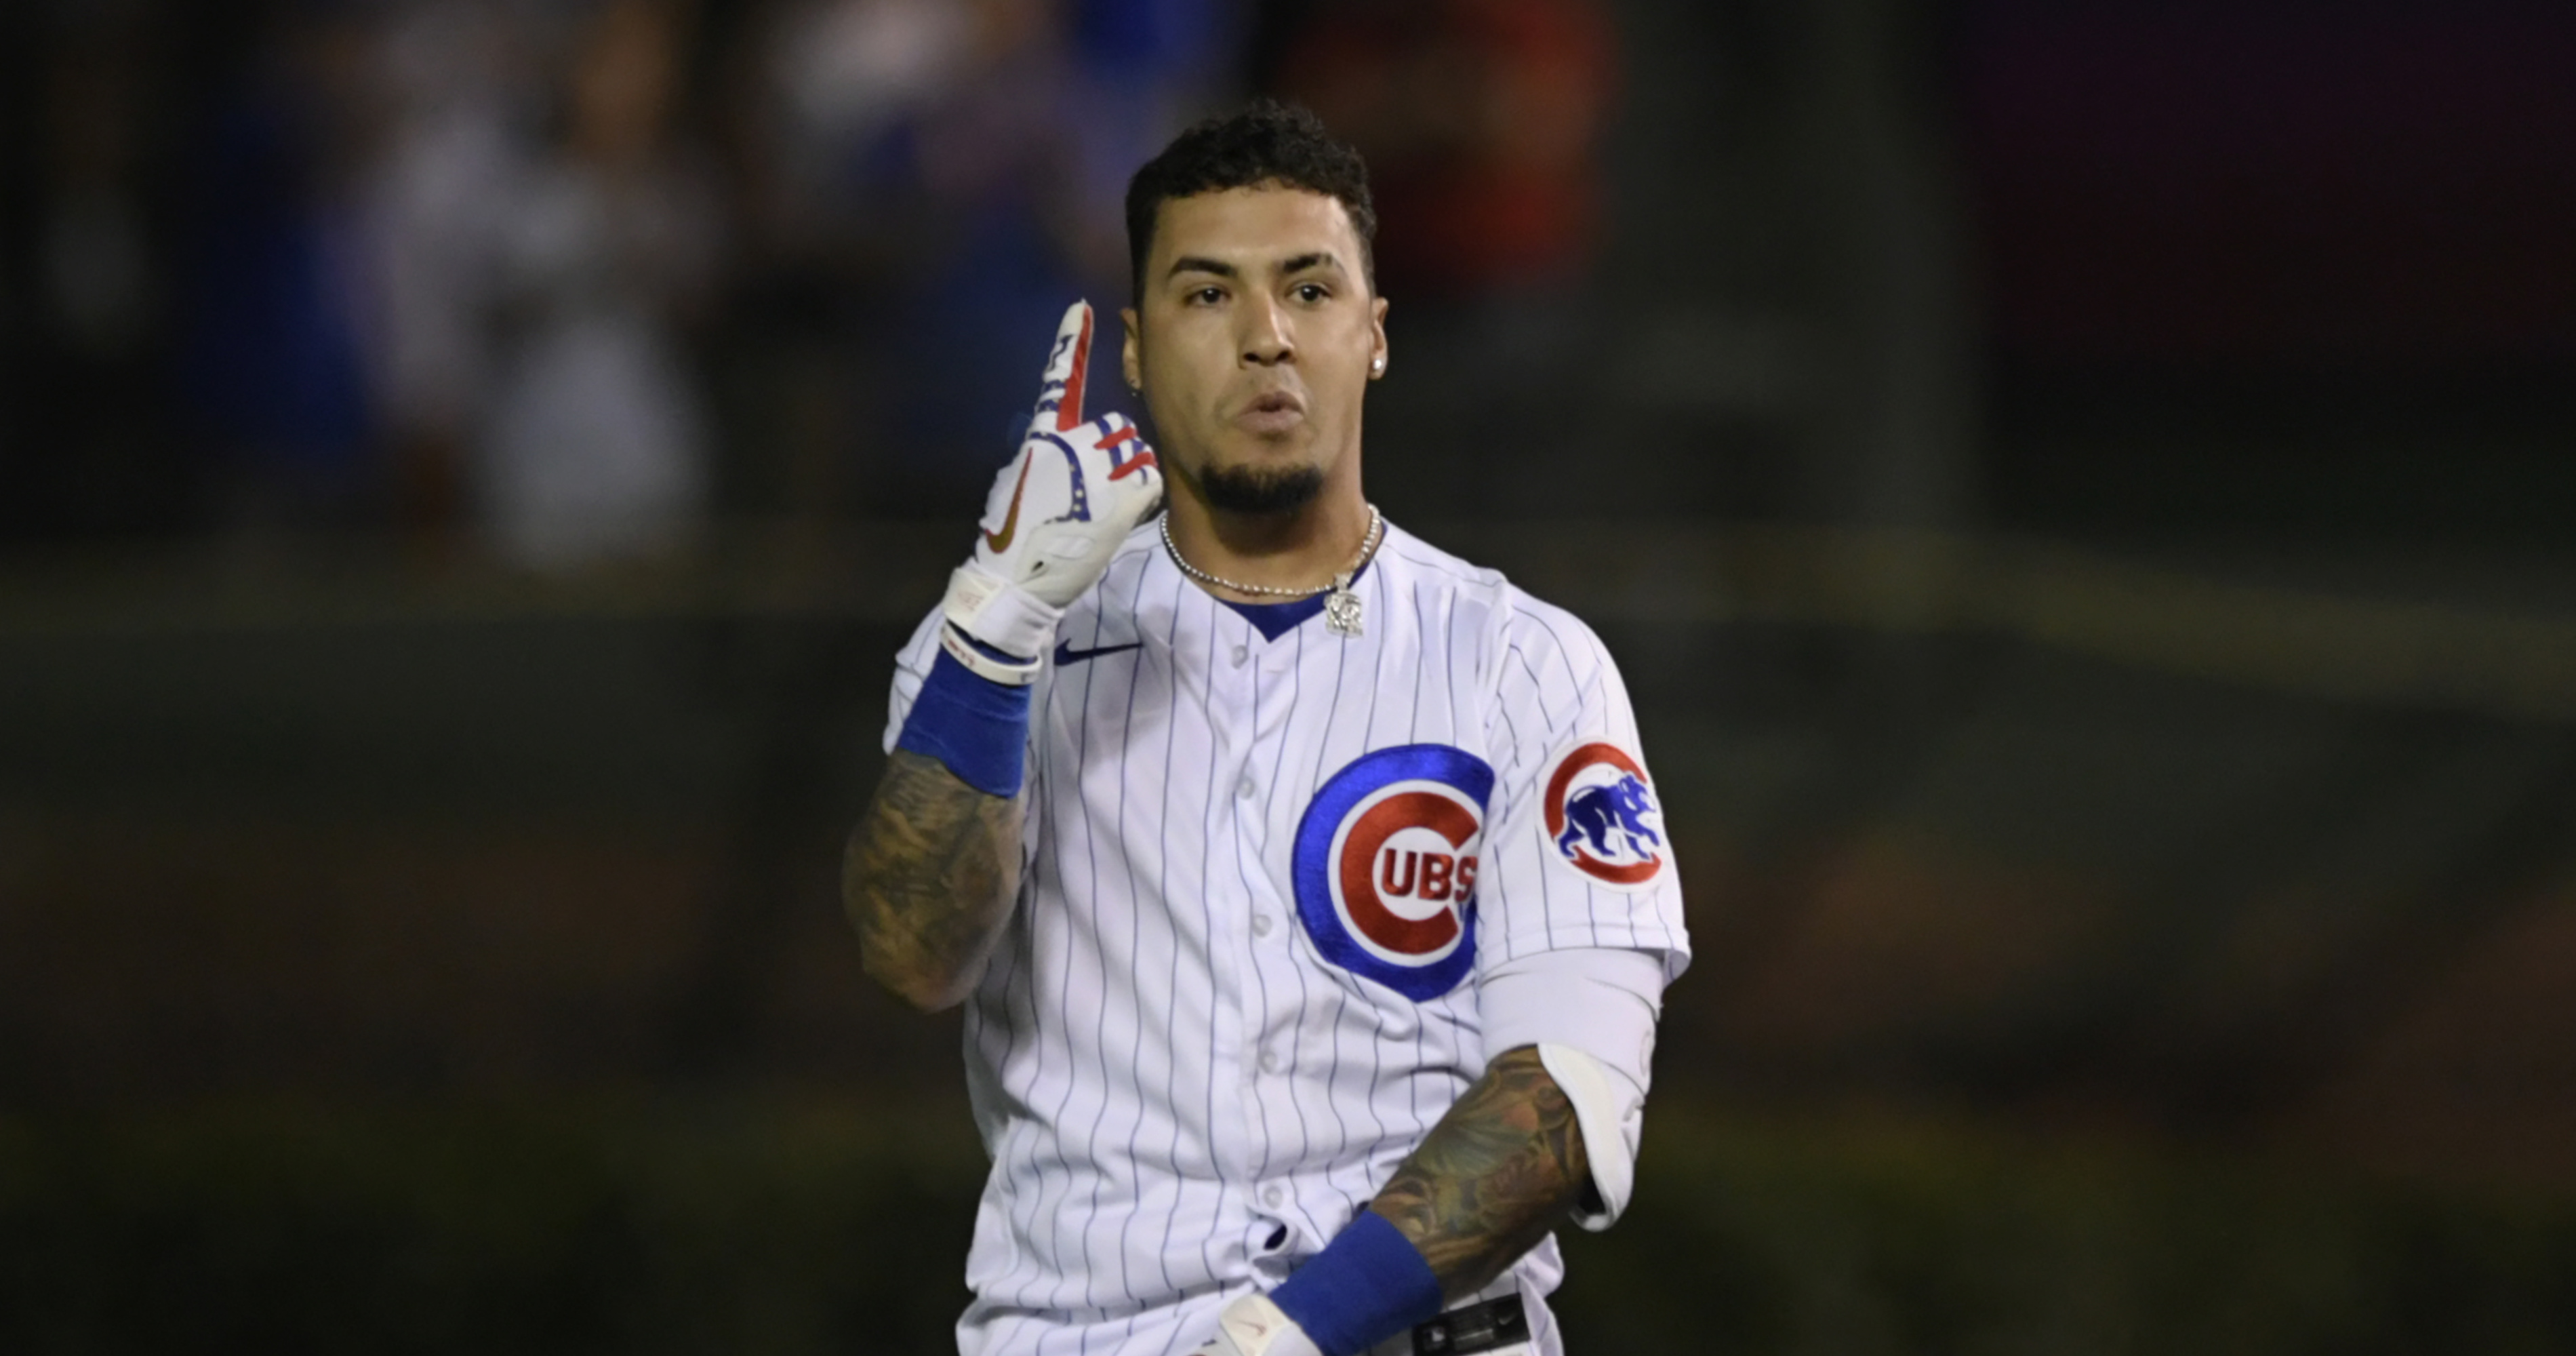 Cubs Send Shortstop Javier Báez to Mets as Sell-Off Continues